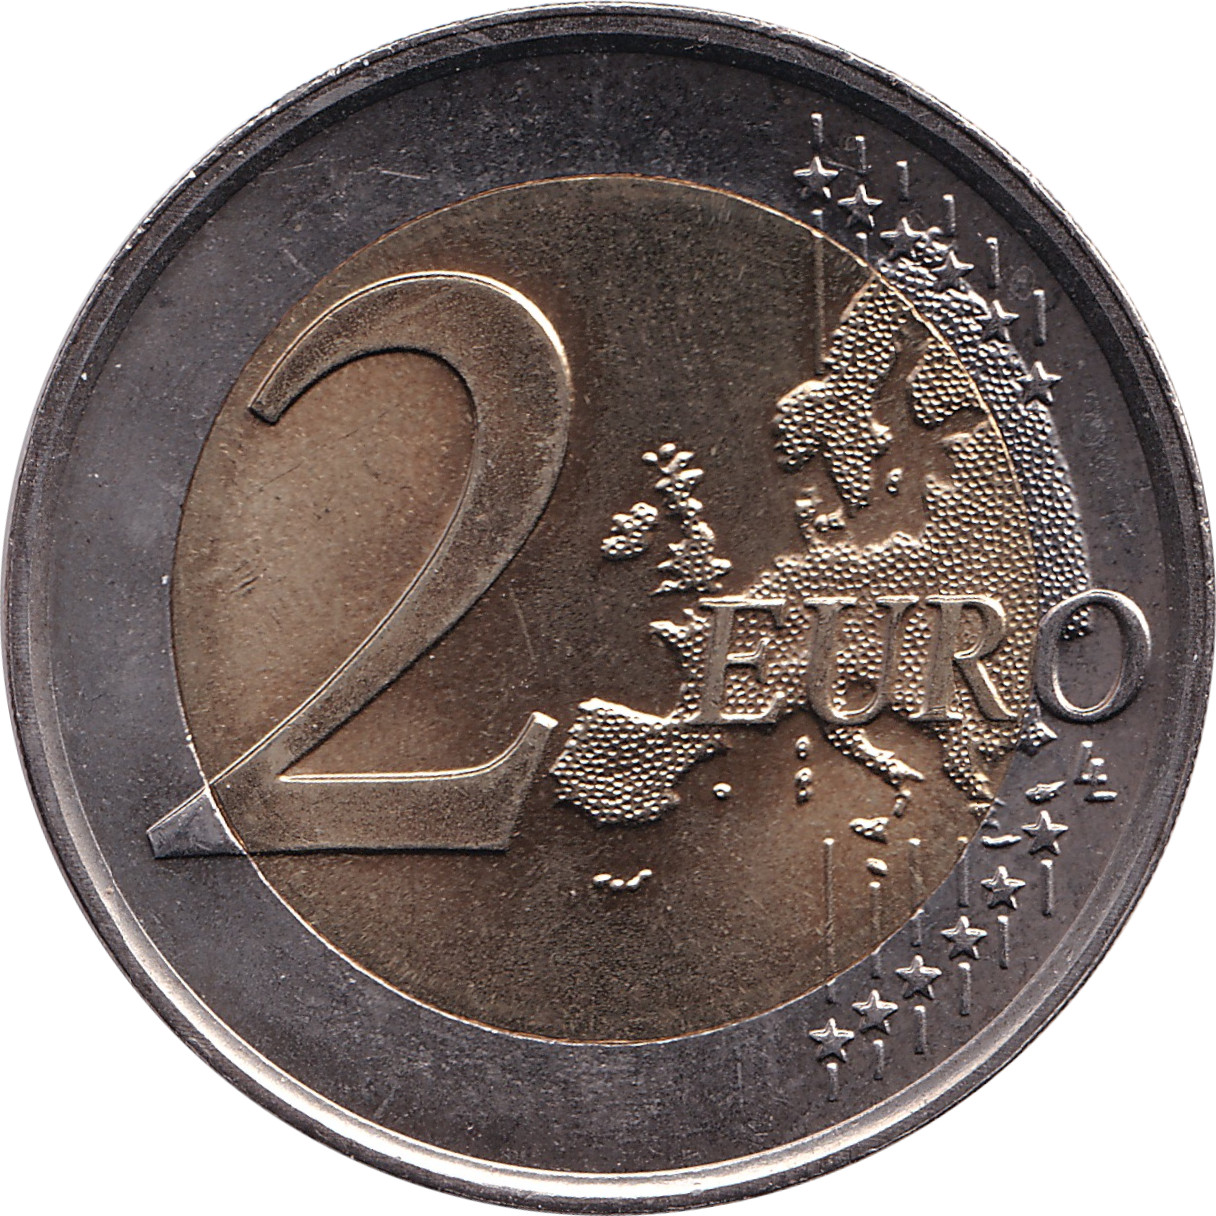 2 euro - Royaume des Pays-Bas - 200 years